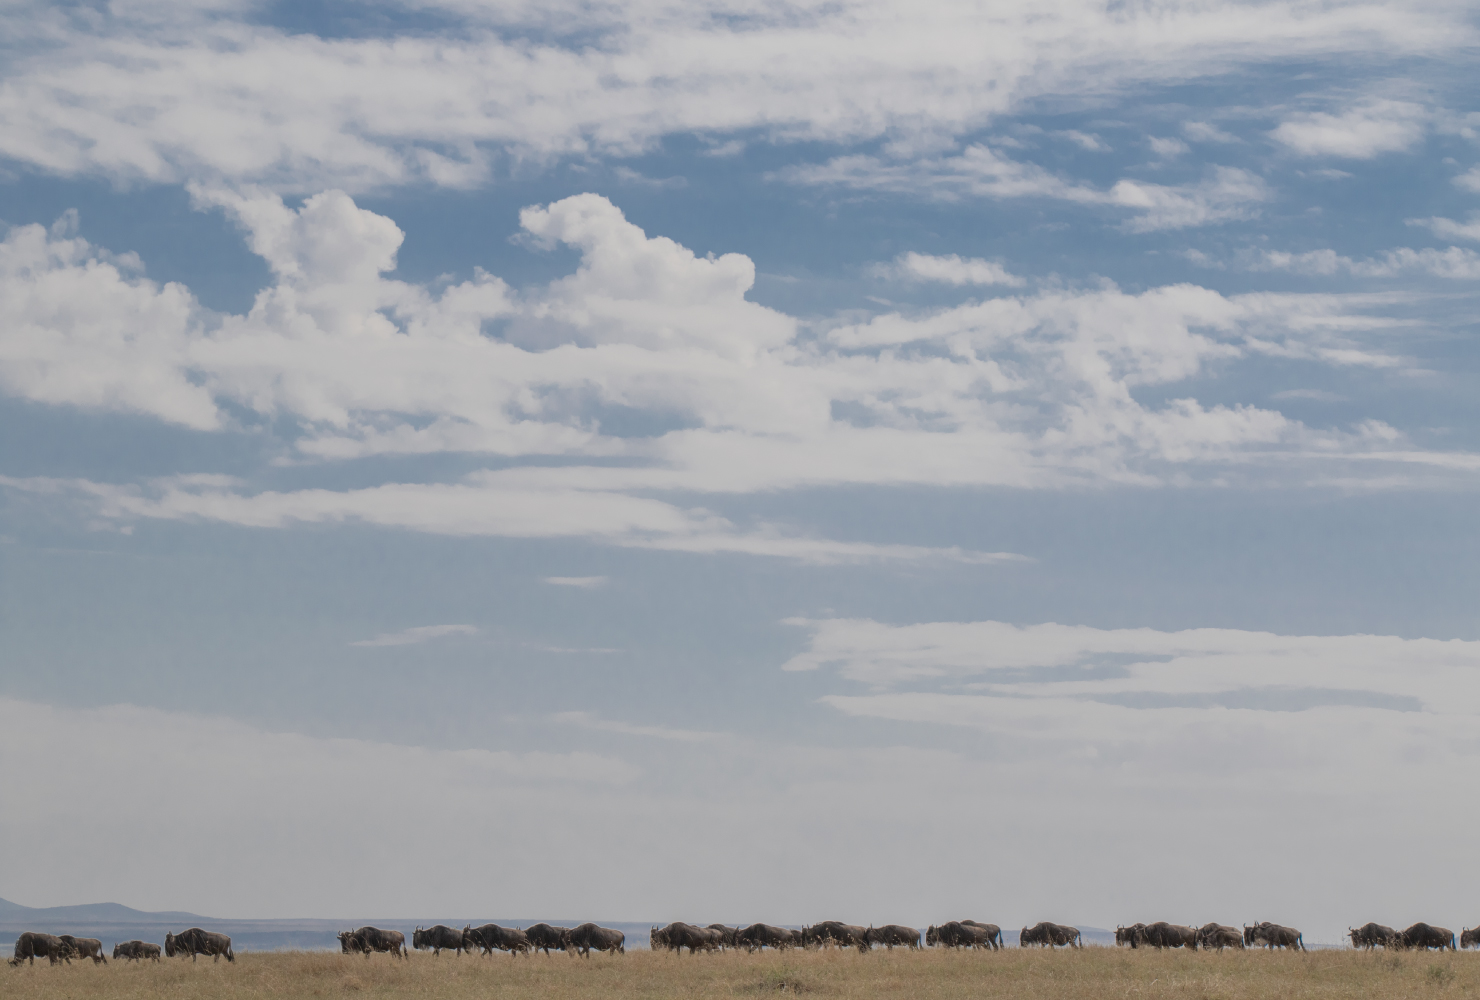 World Safari Day: Reliving the great wildebeest migration